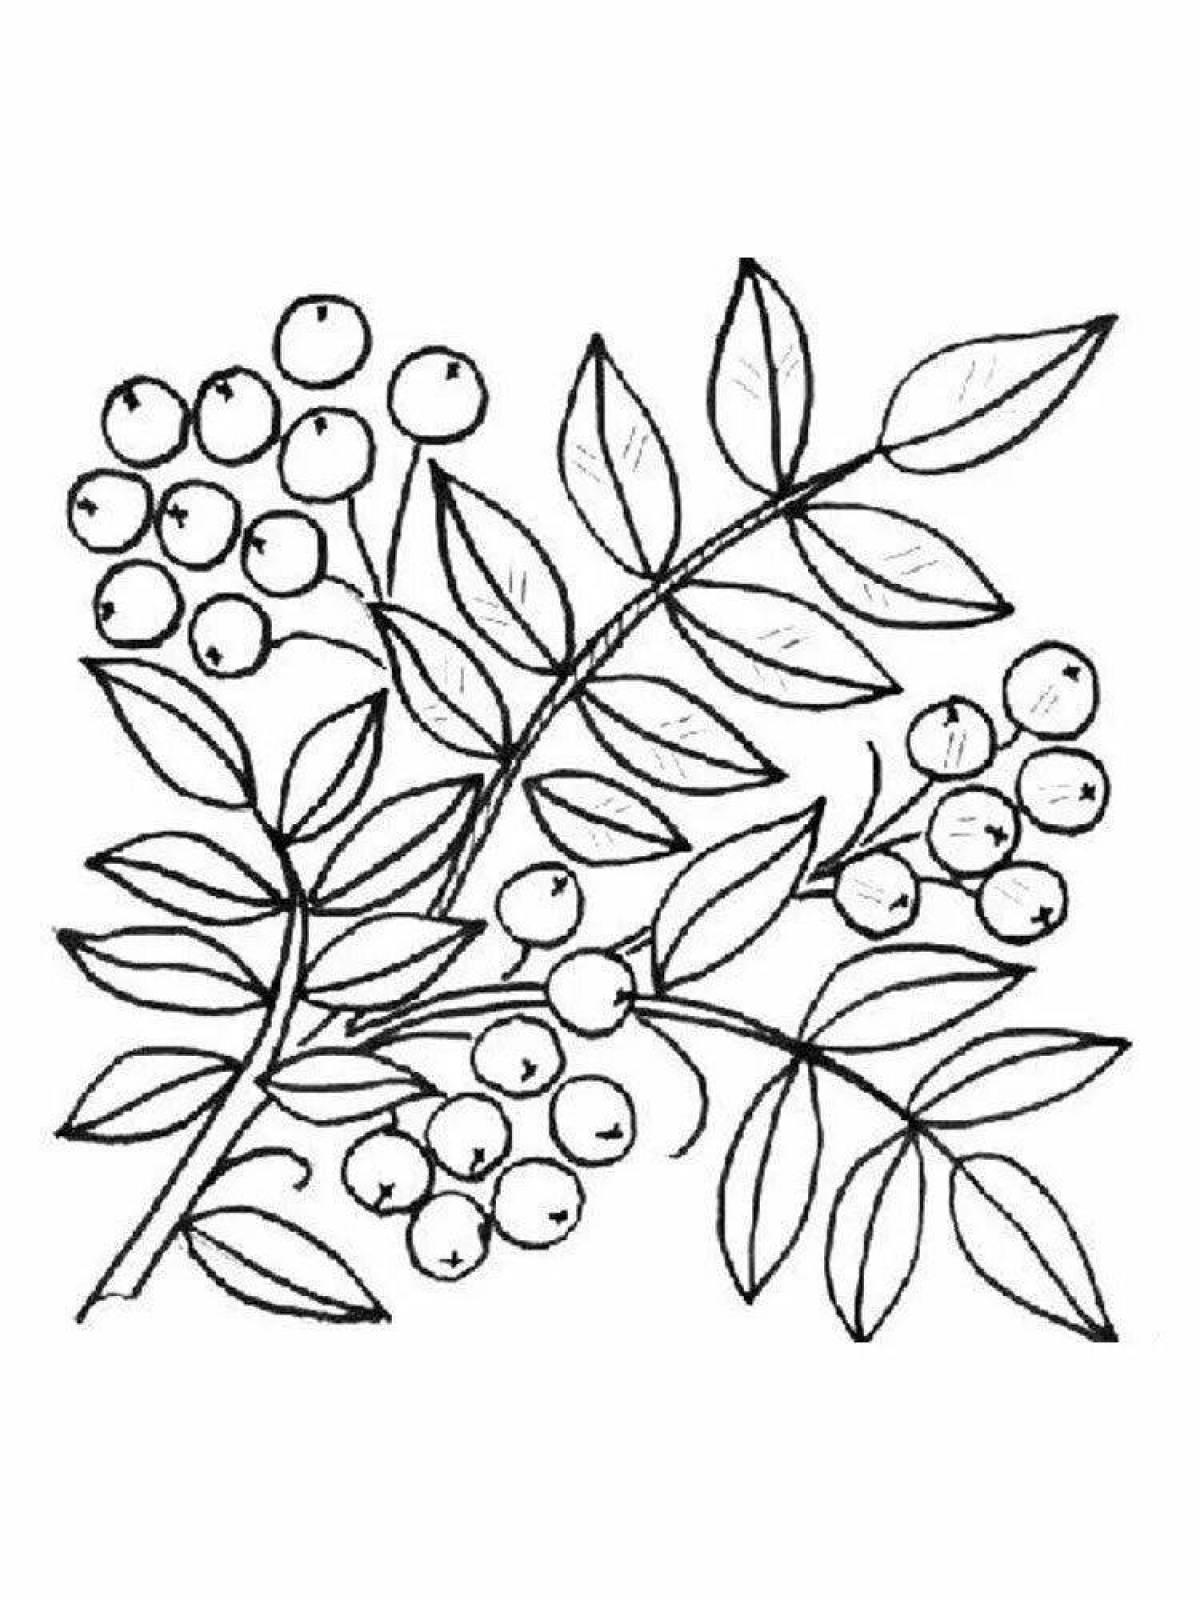 Merry rowan twig coloring for children